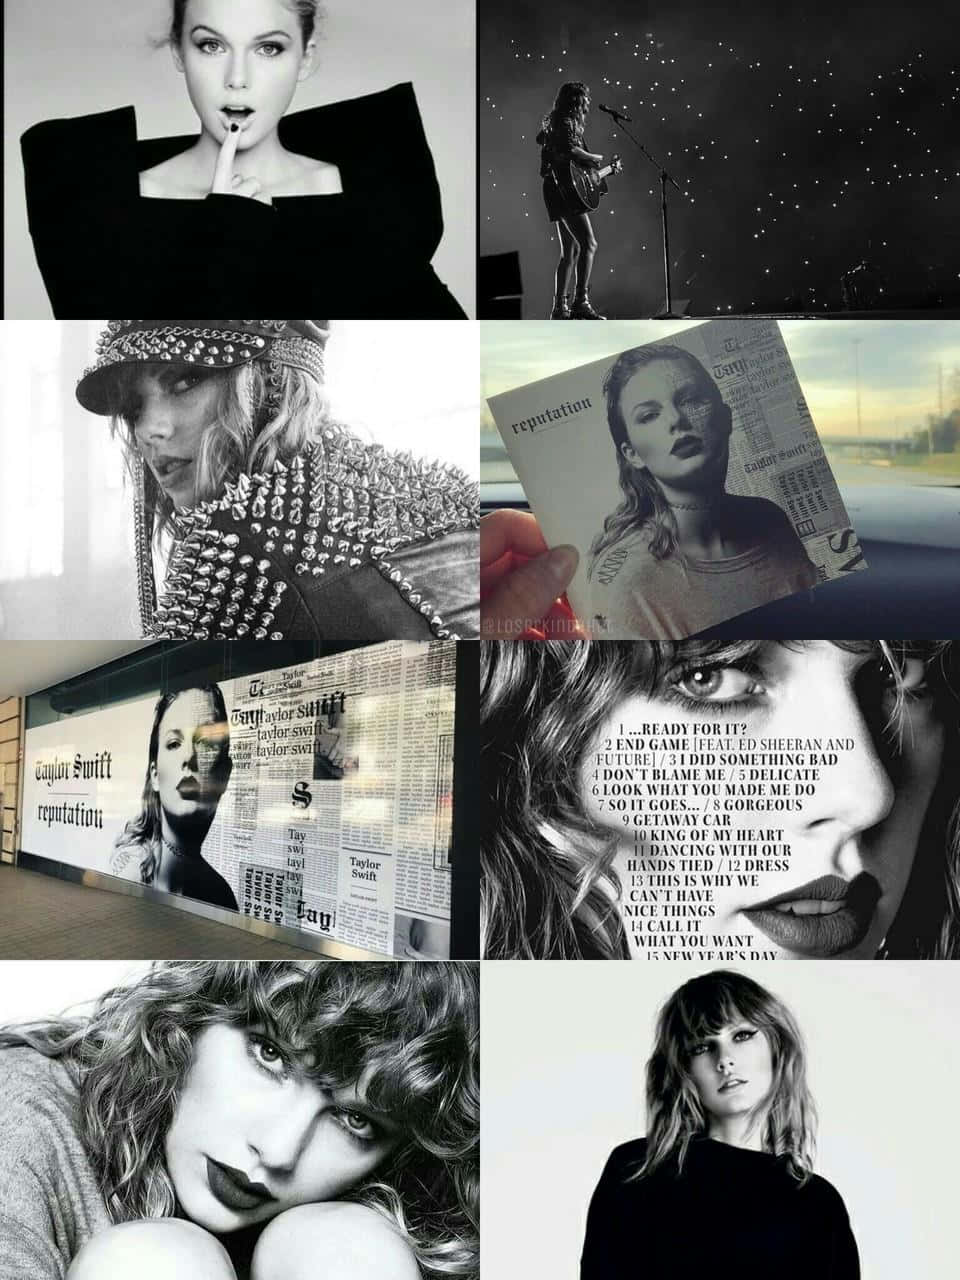 Taylor Swift Aesthetic Collage Wallpaper